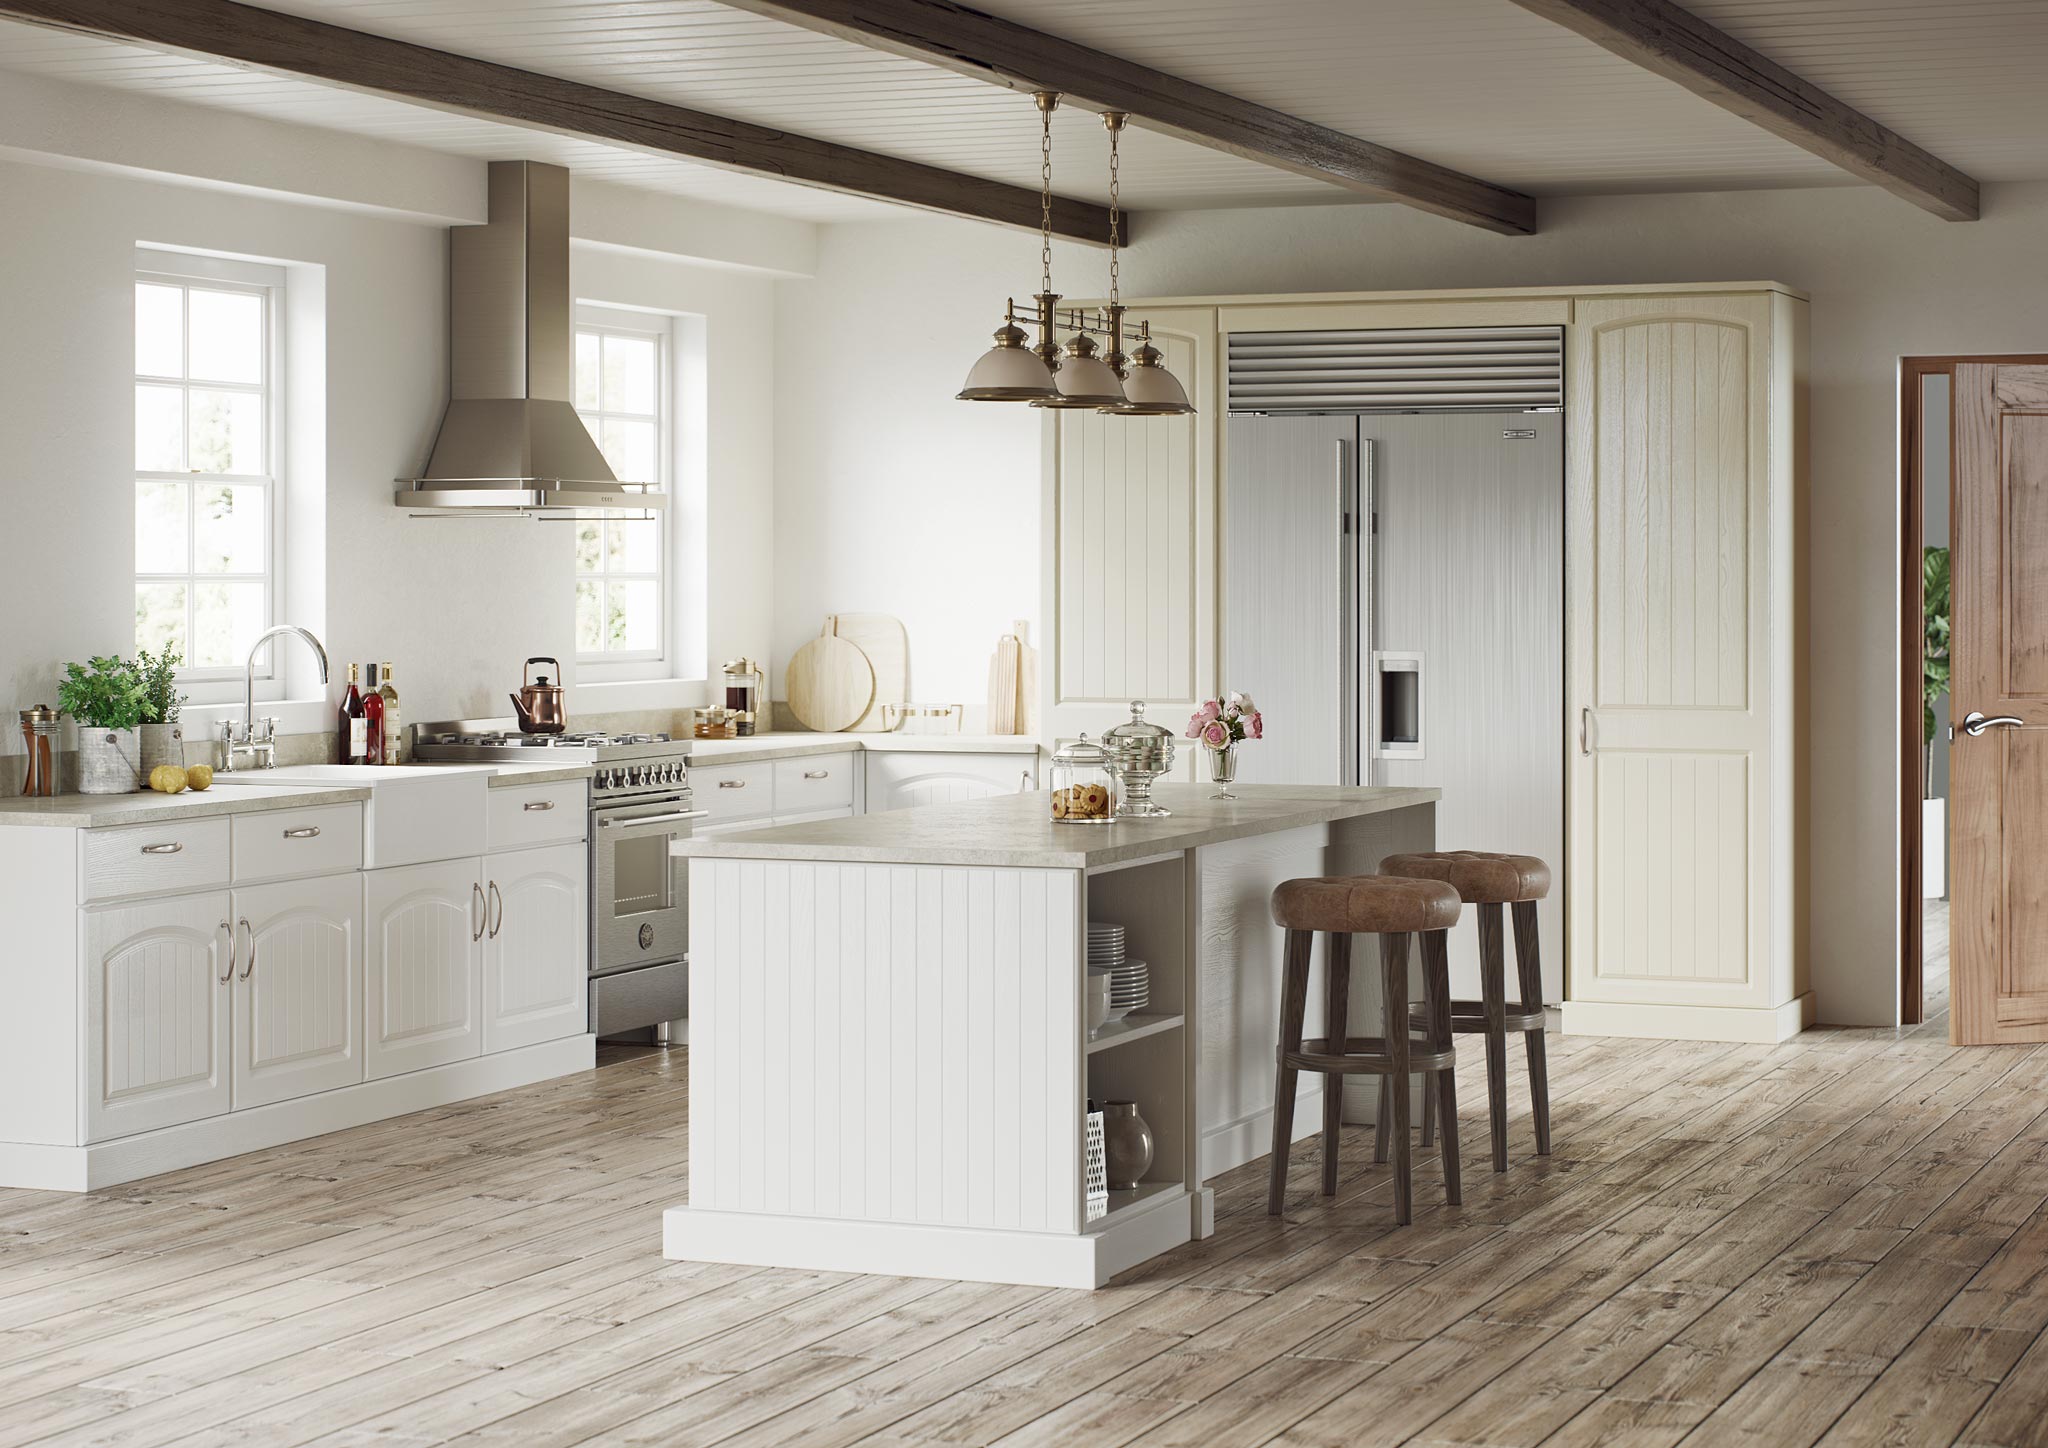 Bespoke kitchen with Cottage style cupboard doors